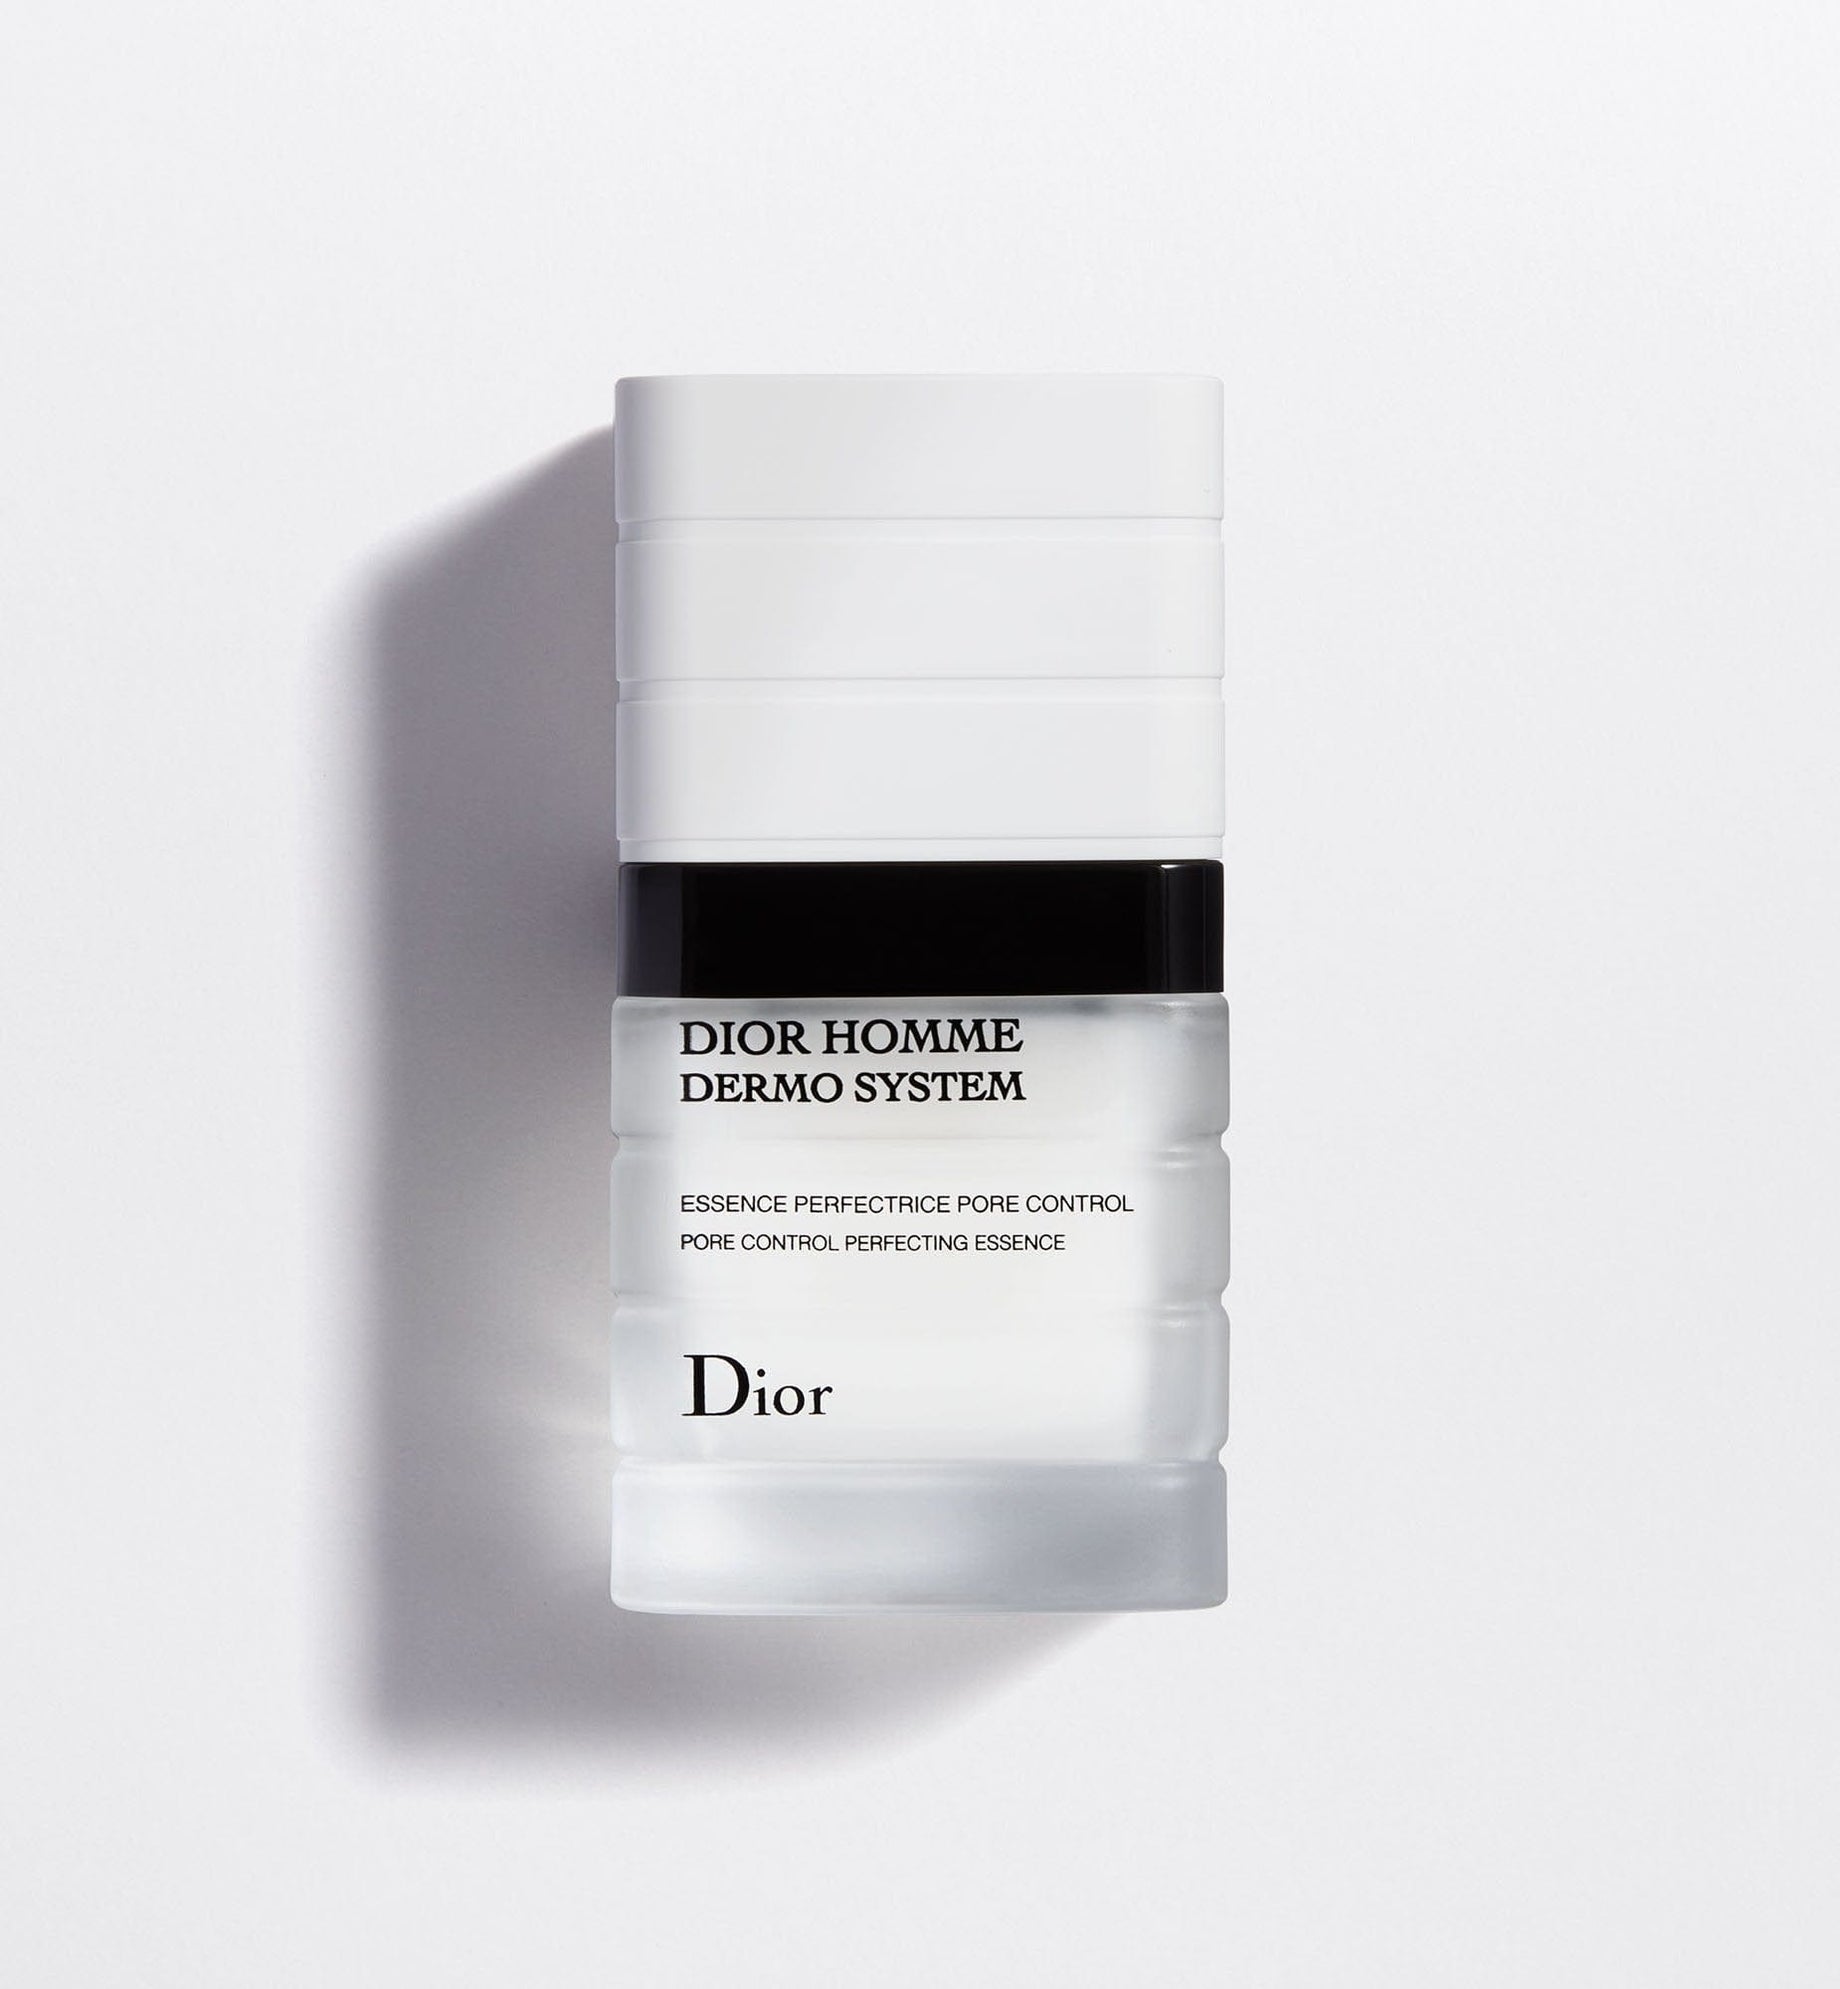 DIOR HOMME DERMO SYSTEM PORE CONTROL PERFECTING ESSENCE